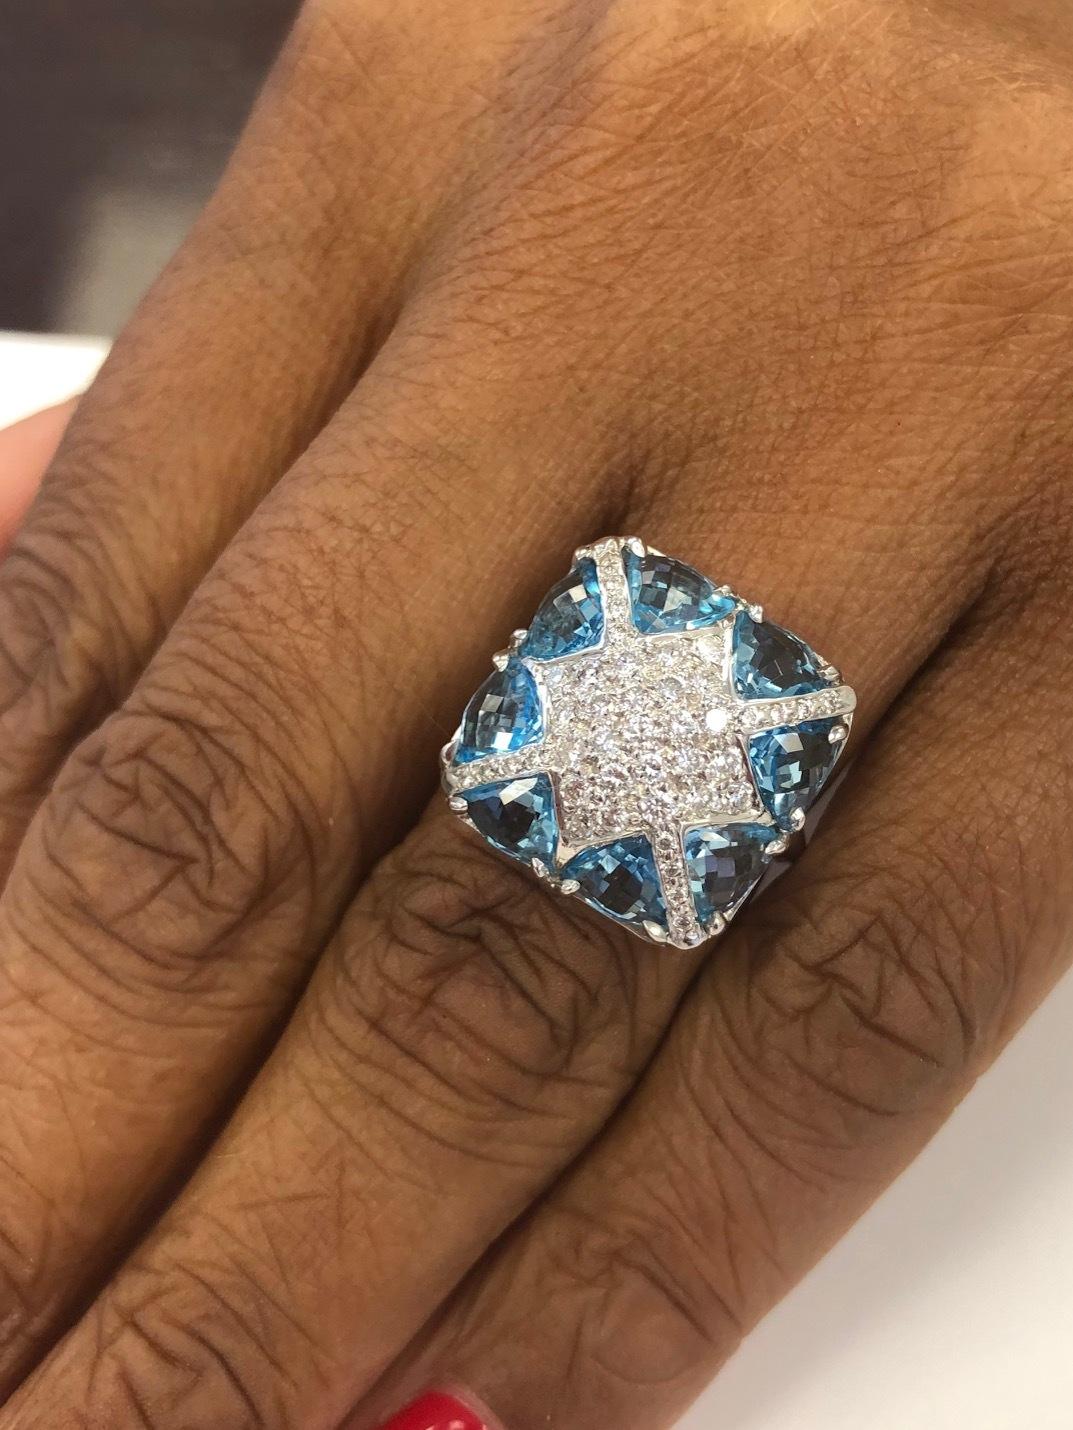 This is a very delicate design with all specially cut Blue Topaz. The ring is made in 18 Kt White Gold, set with 41 diamonds 0.60 carat and 8 custom cut trillion Blue Topaz 5.10 carats. Also available with Topaz trillions.
The ring finger size is